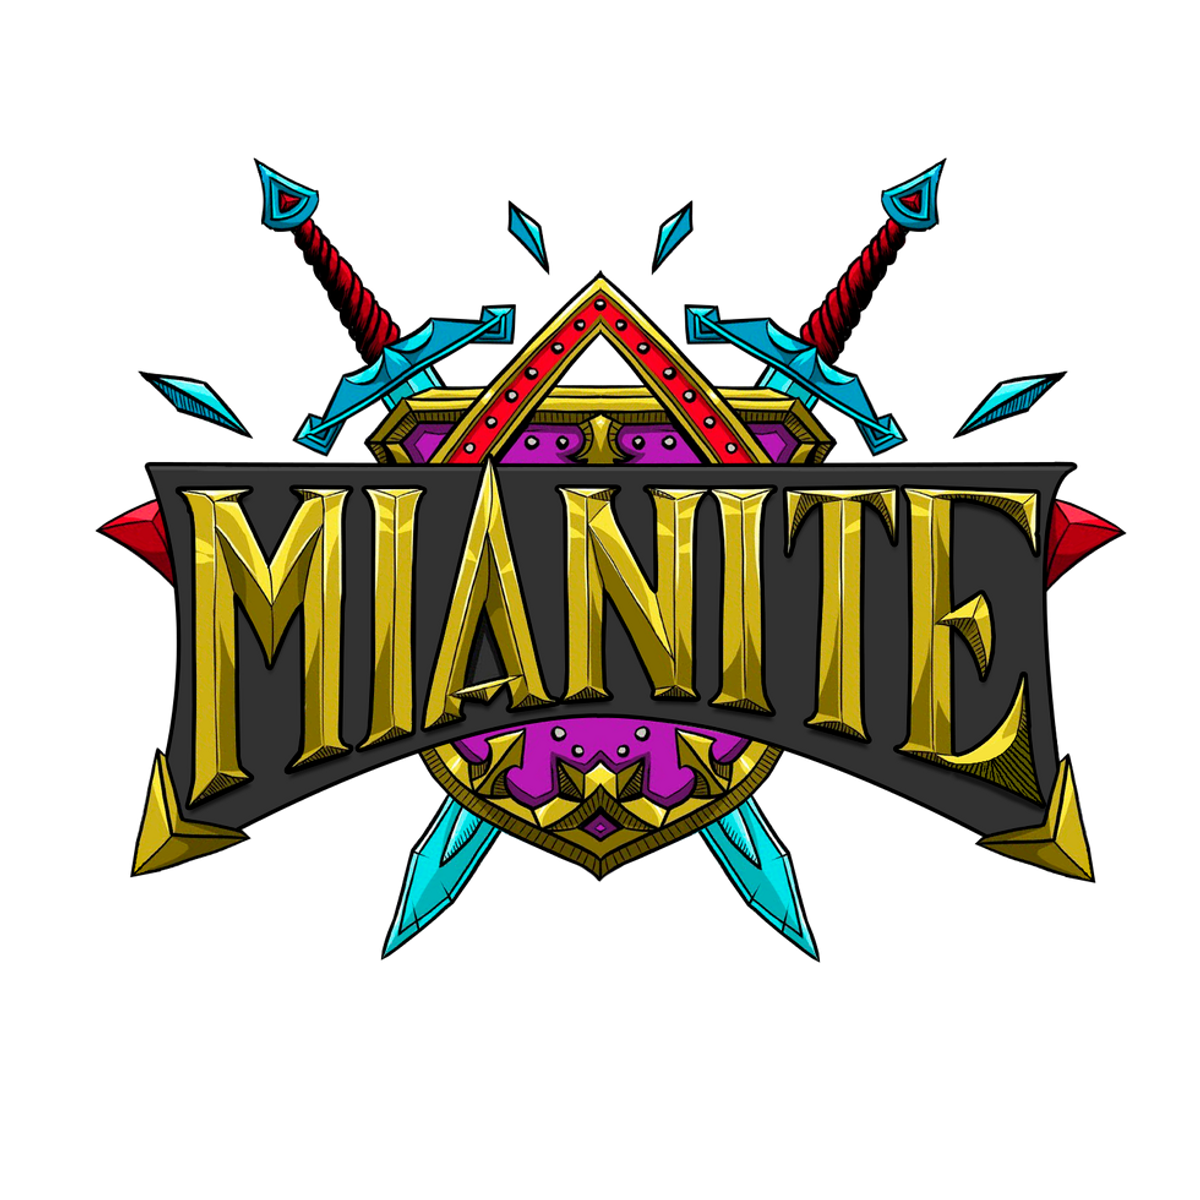 Mianite: The Most Creative Show On The Internet